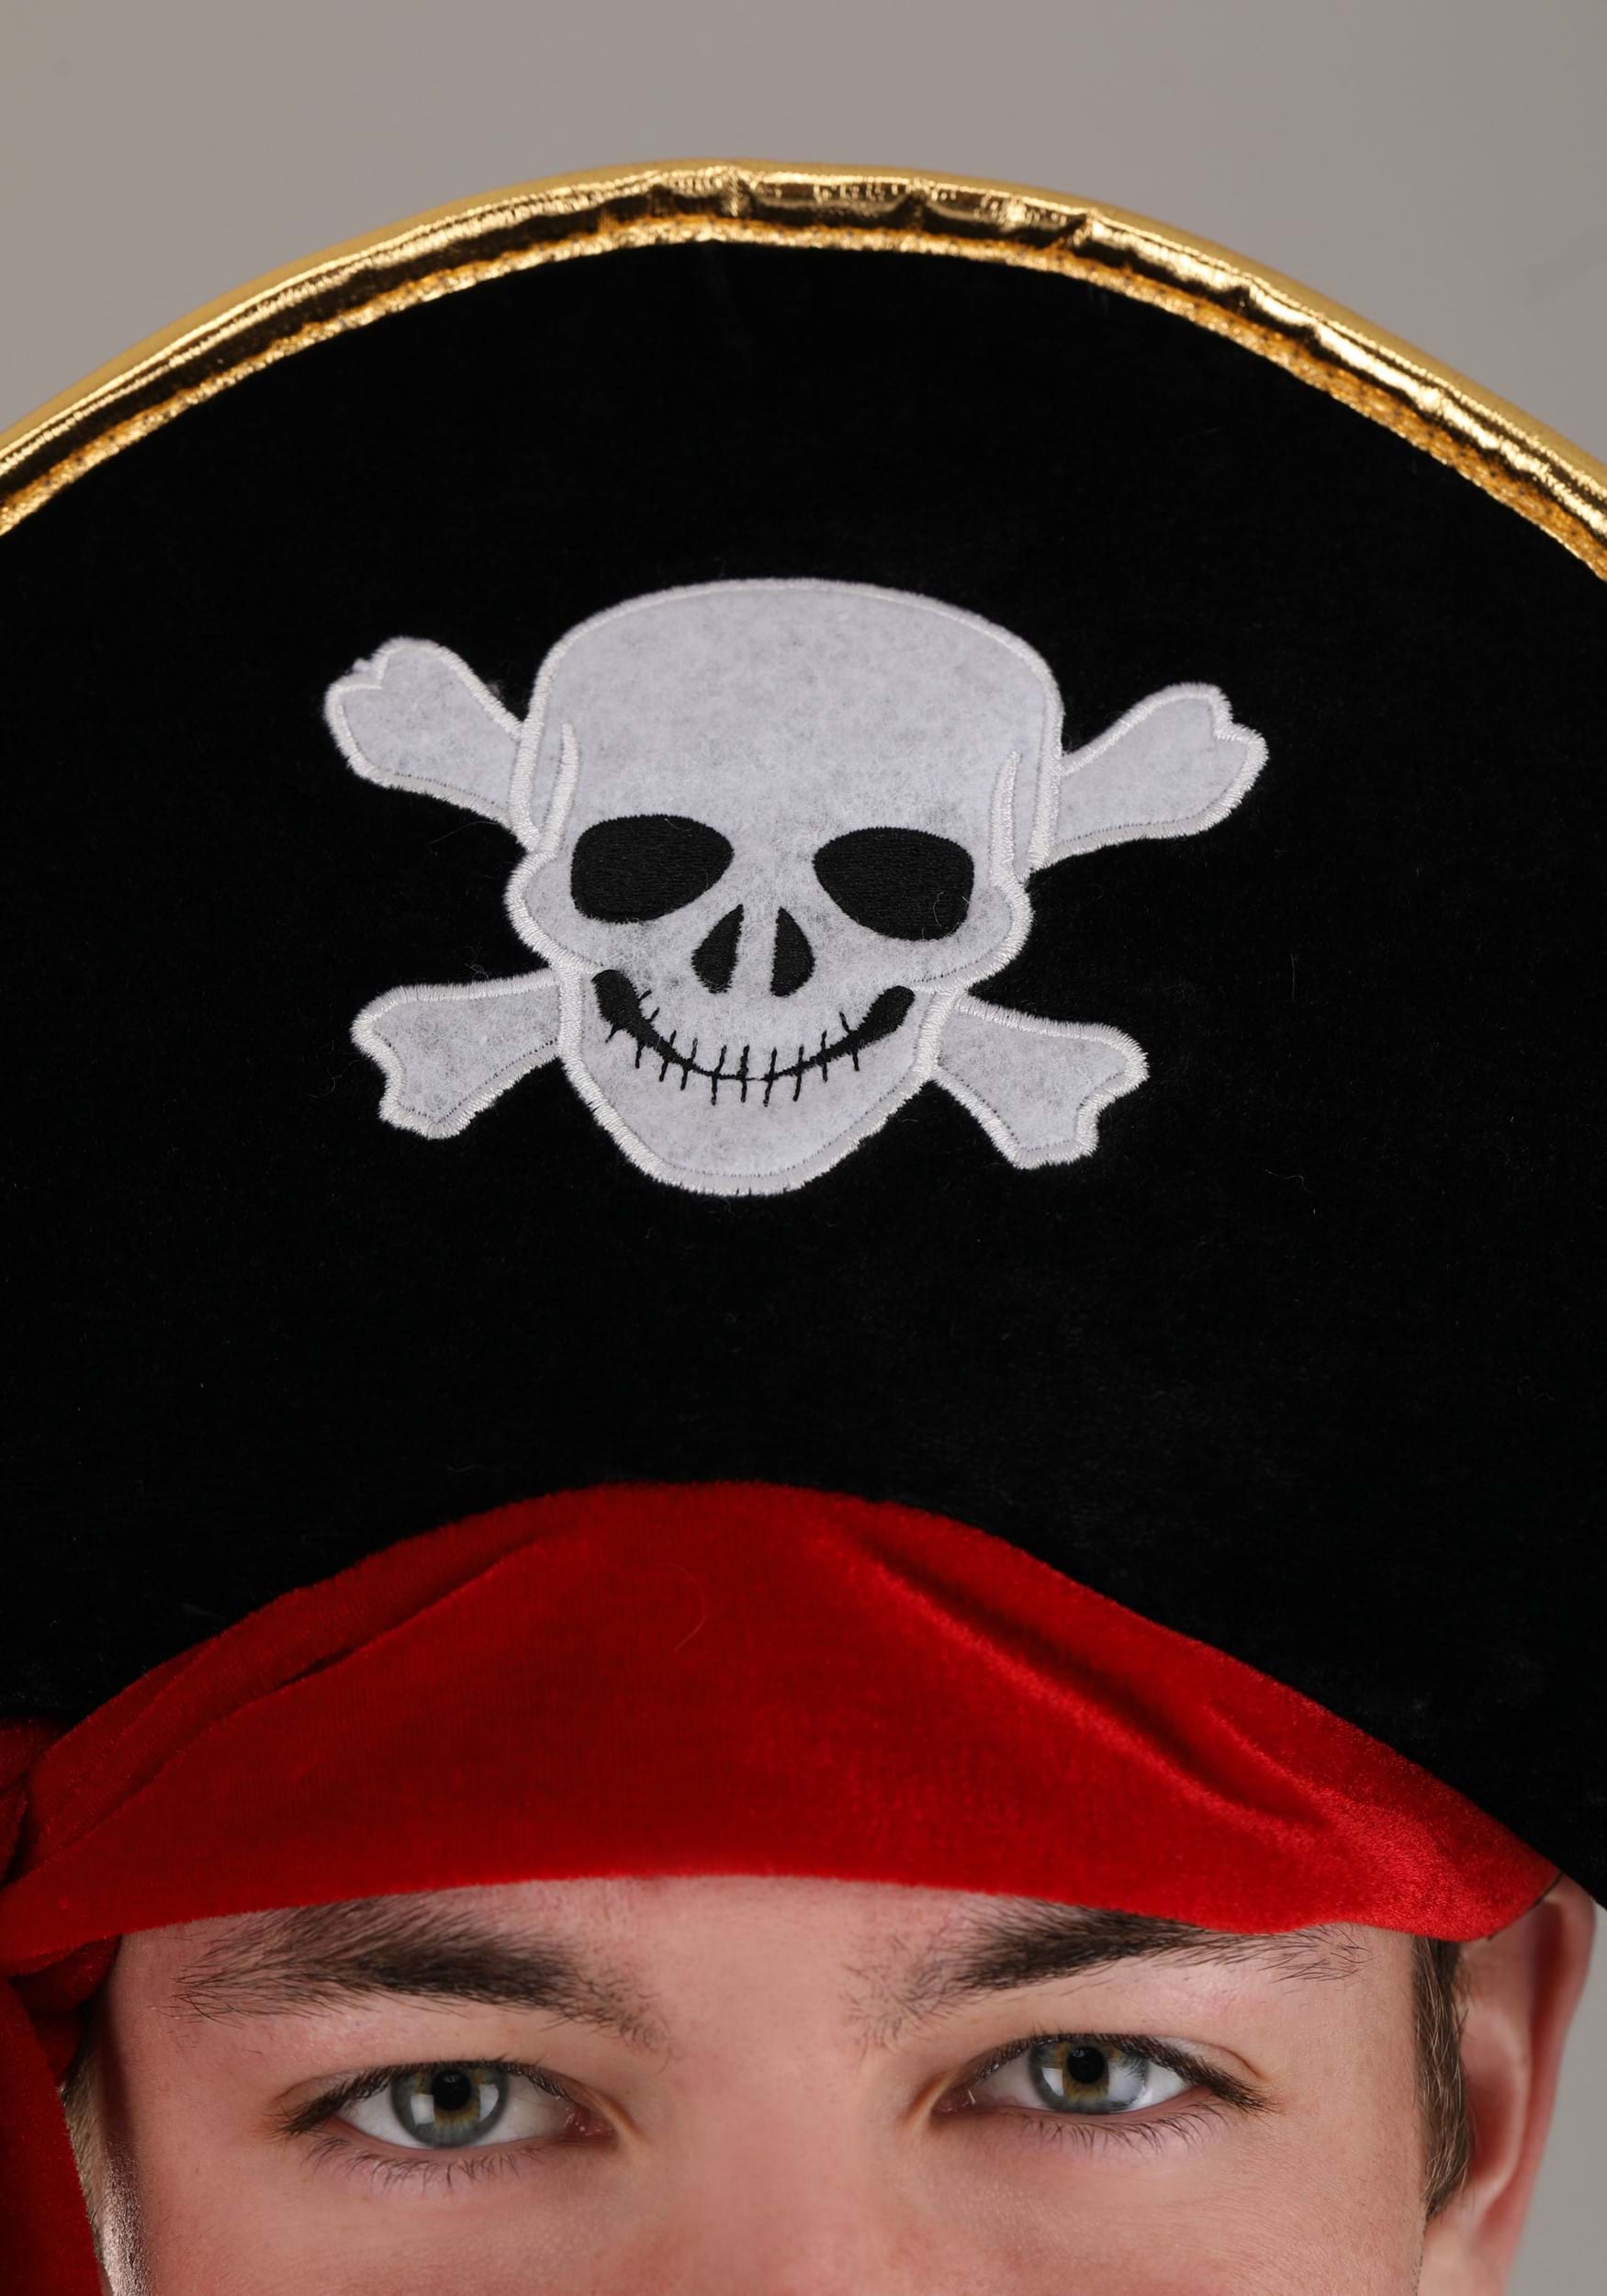 Classic Pirate Hat For Adults